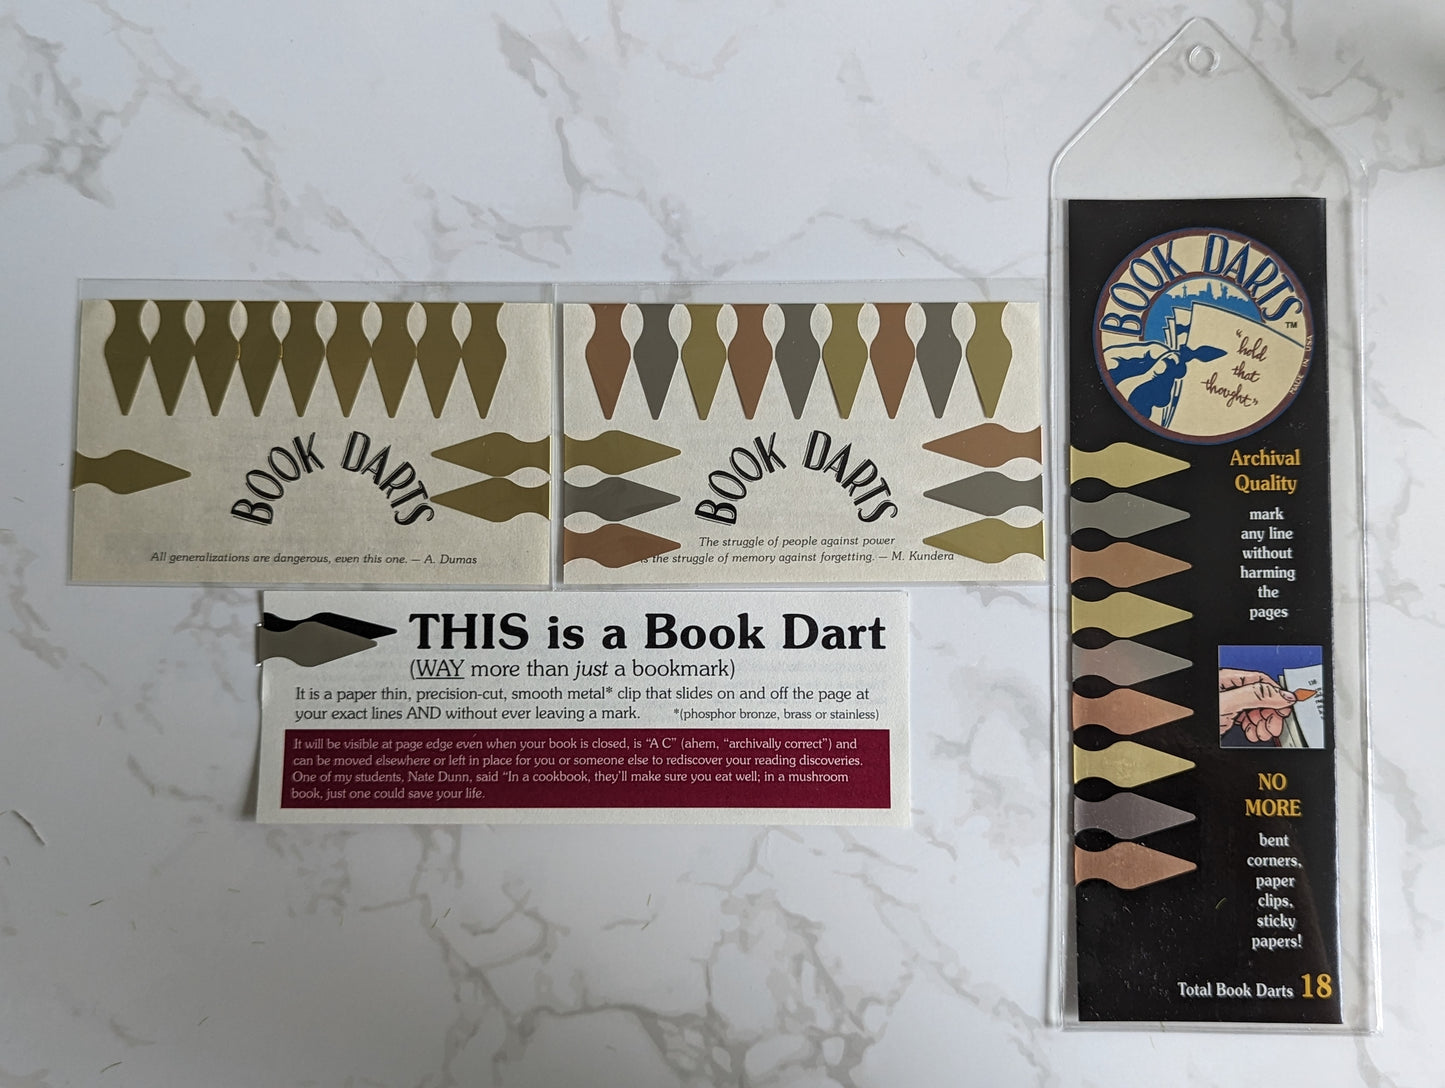 Packages of book darts.